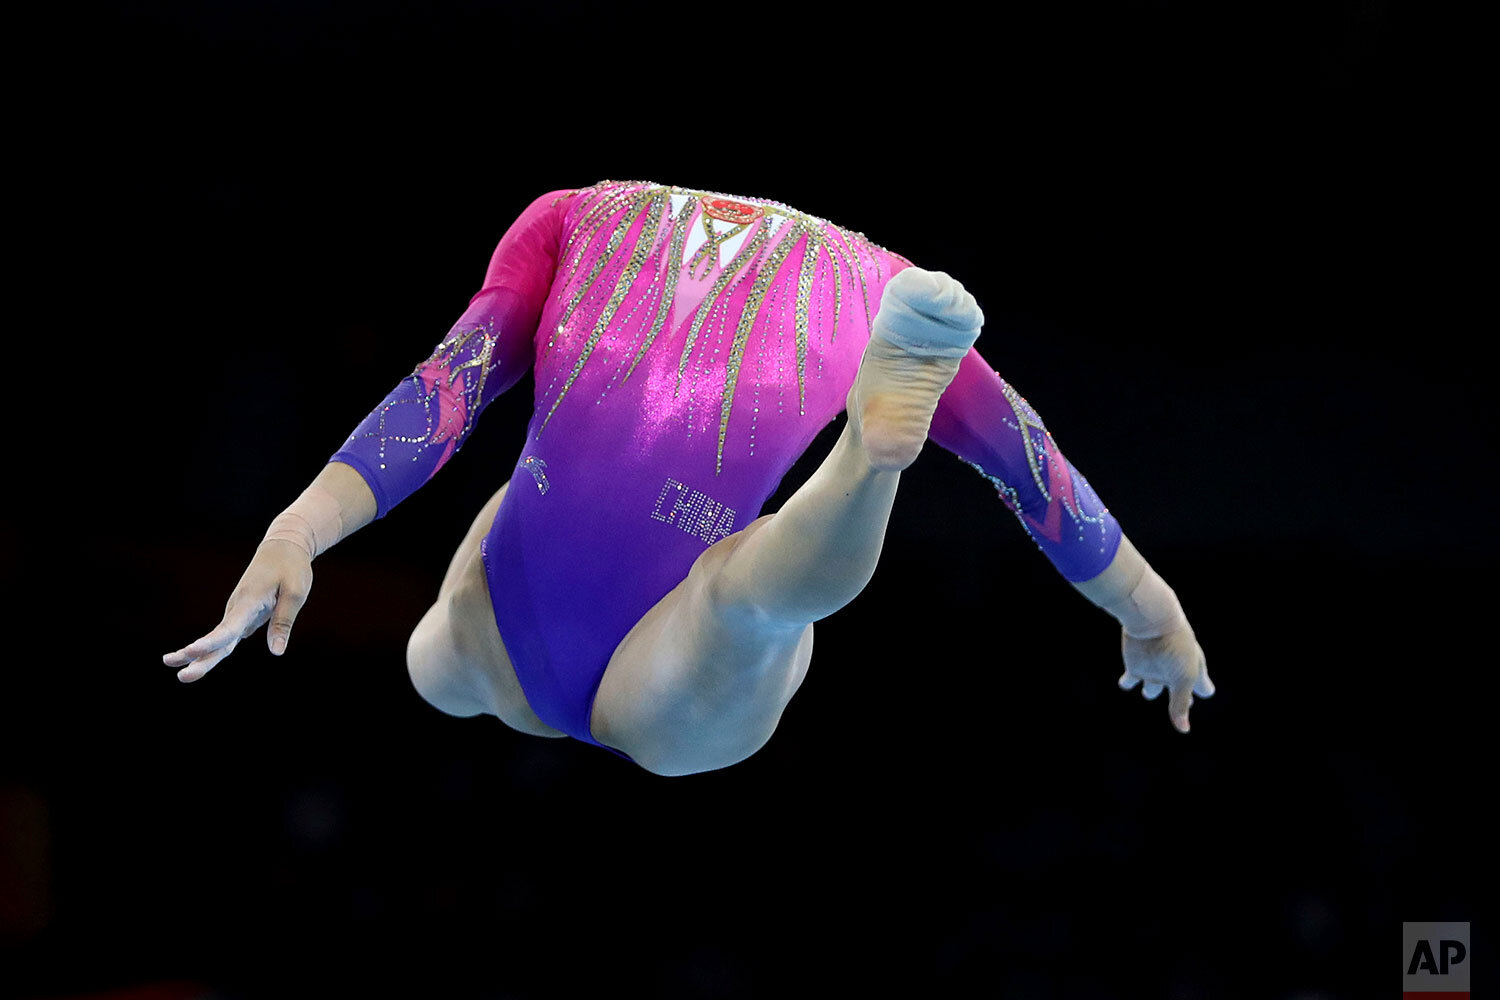  Xijing Tang of China performs on the floor during the women's all-around final at the Gymnastics World Championships in Stuttgart, Germany, Thursday, Oct. 10, 2019. (AP Photo/Matthias Schrader) 